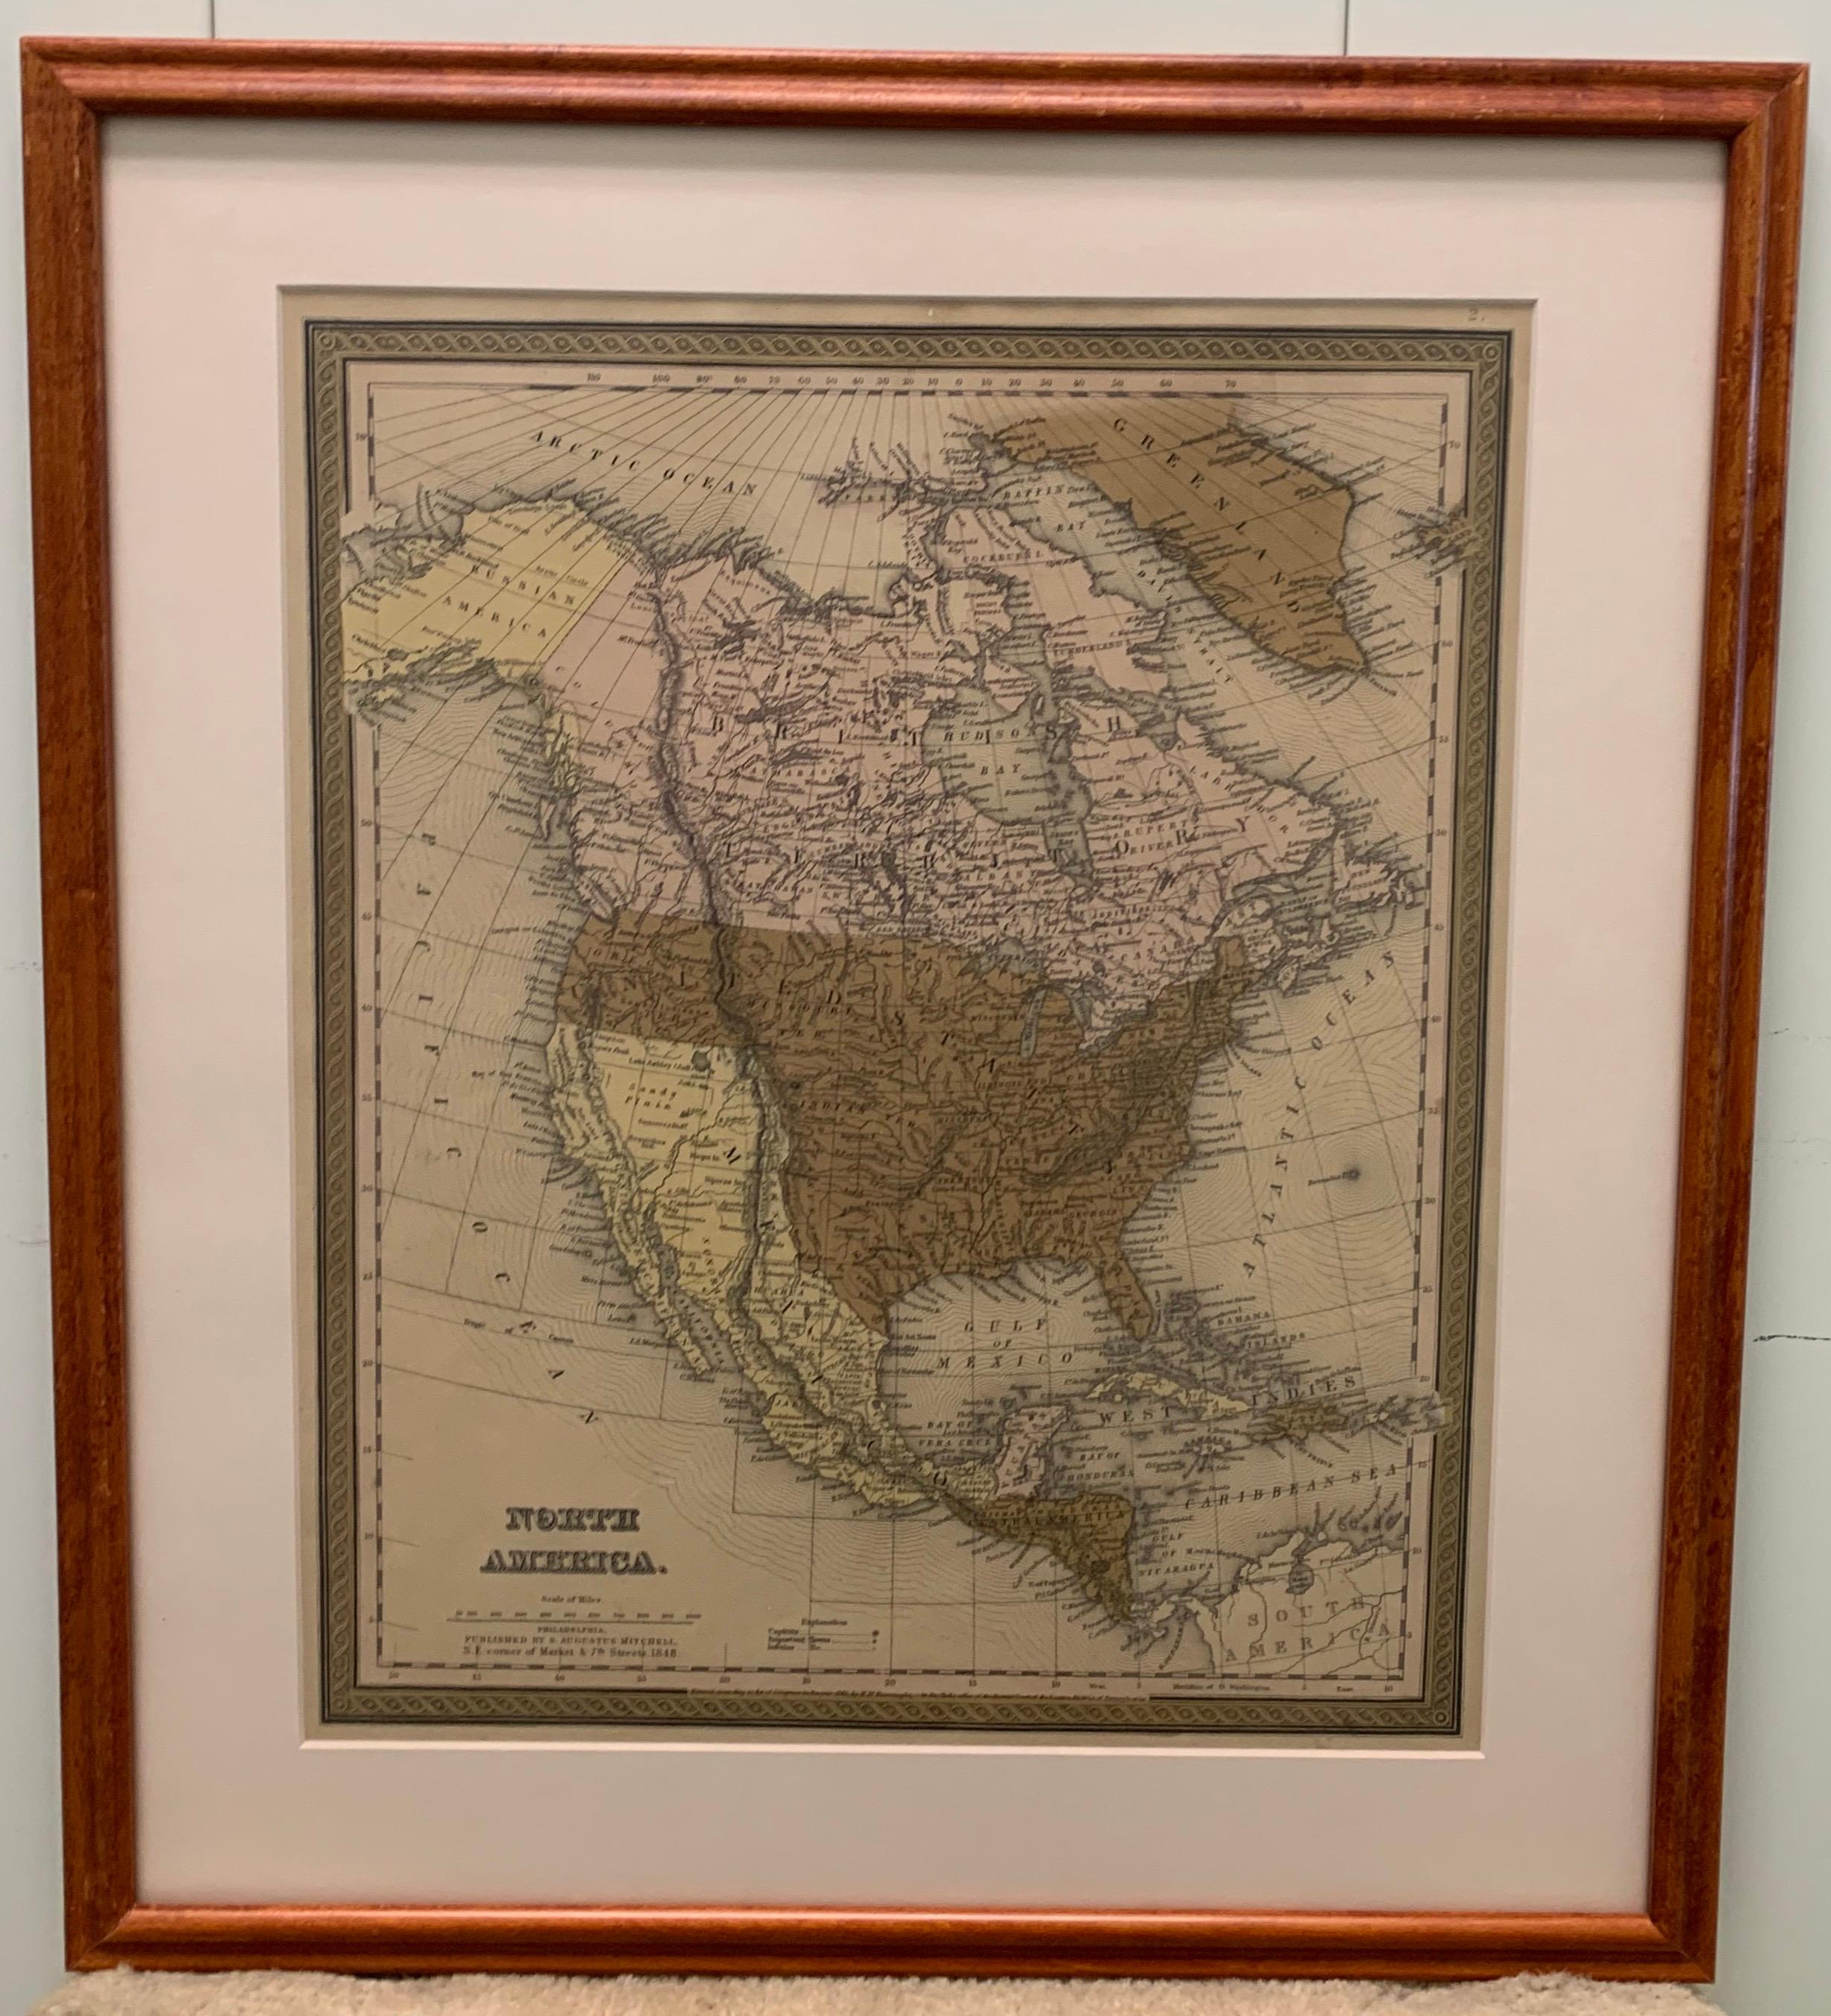 Framed 1848 S. Augustus and Mitchell, Philadelphia , PA North America and territories map. 
Featuring the United States, Canada (British Territory) and Mexican Territories. 
As found high end custom framing with  medium carved wood frame, custom